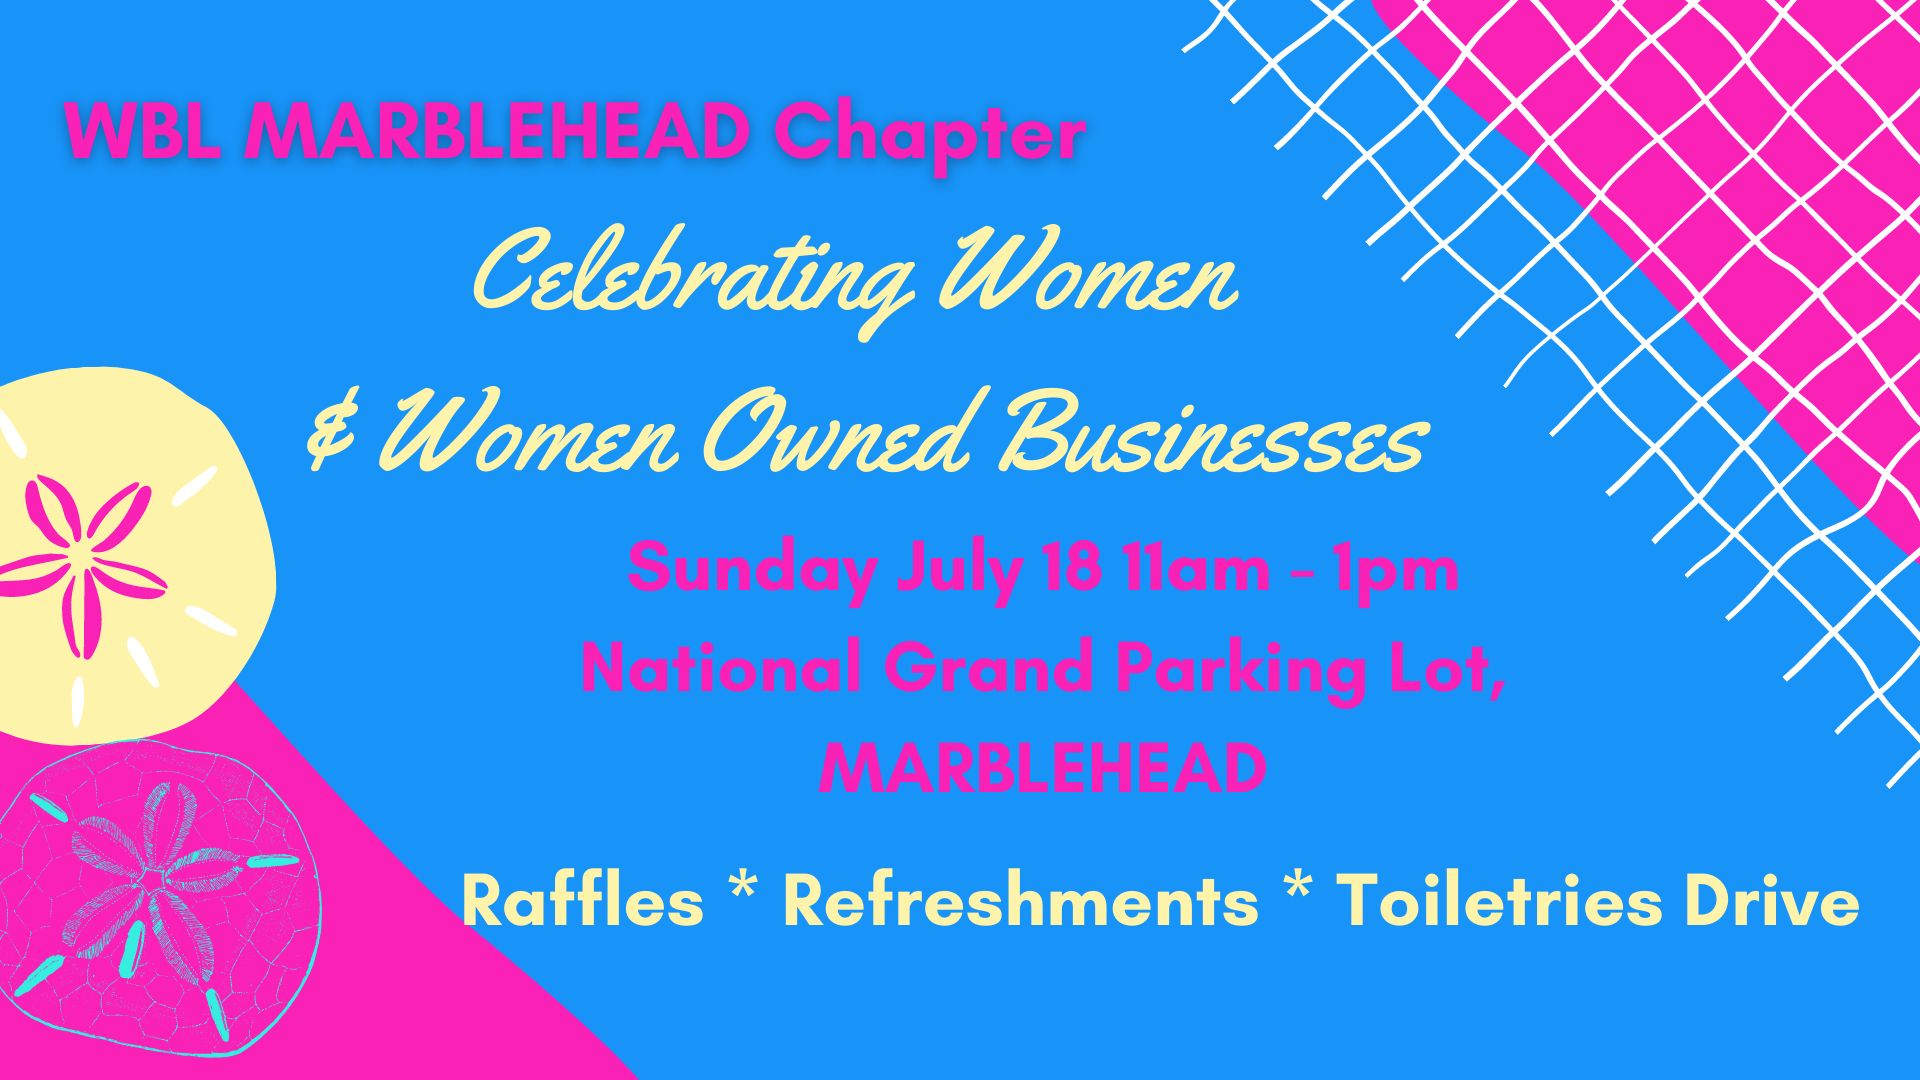 Celebrating Women and Women Owned Businesses, Marblehead, Massachusetts, United States